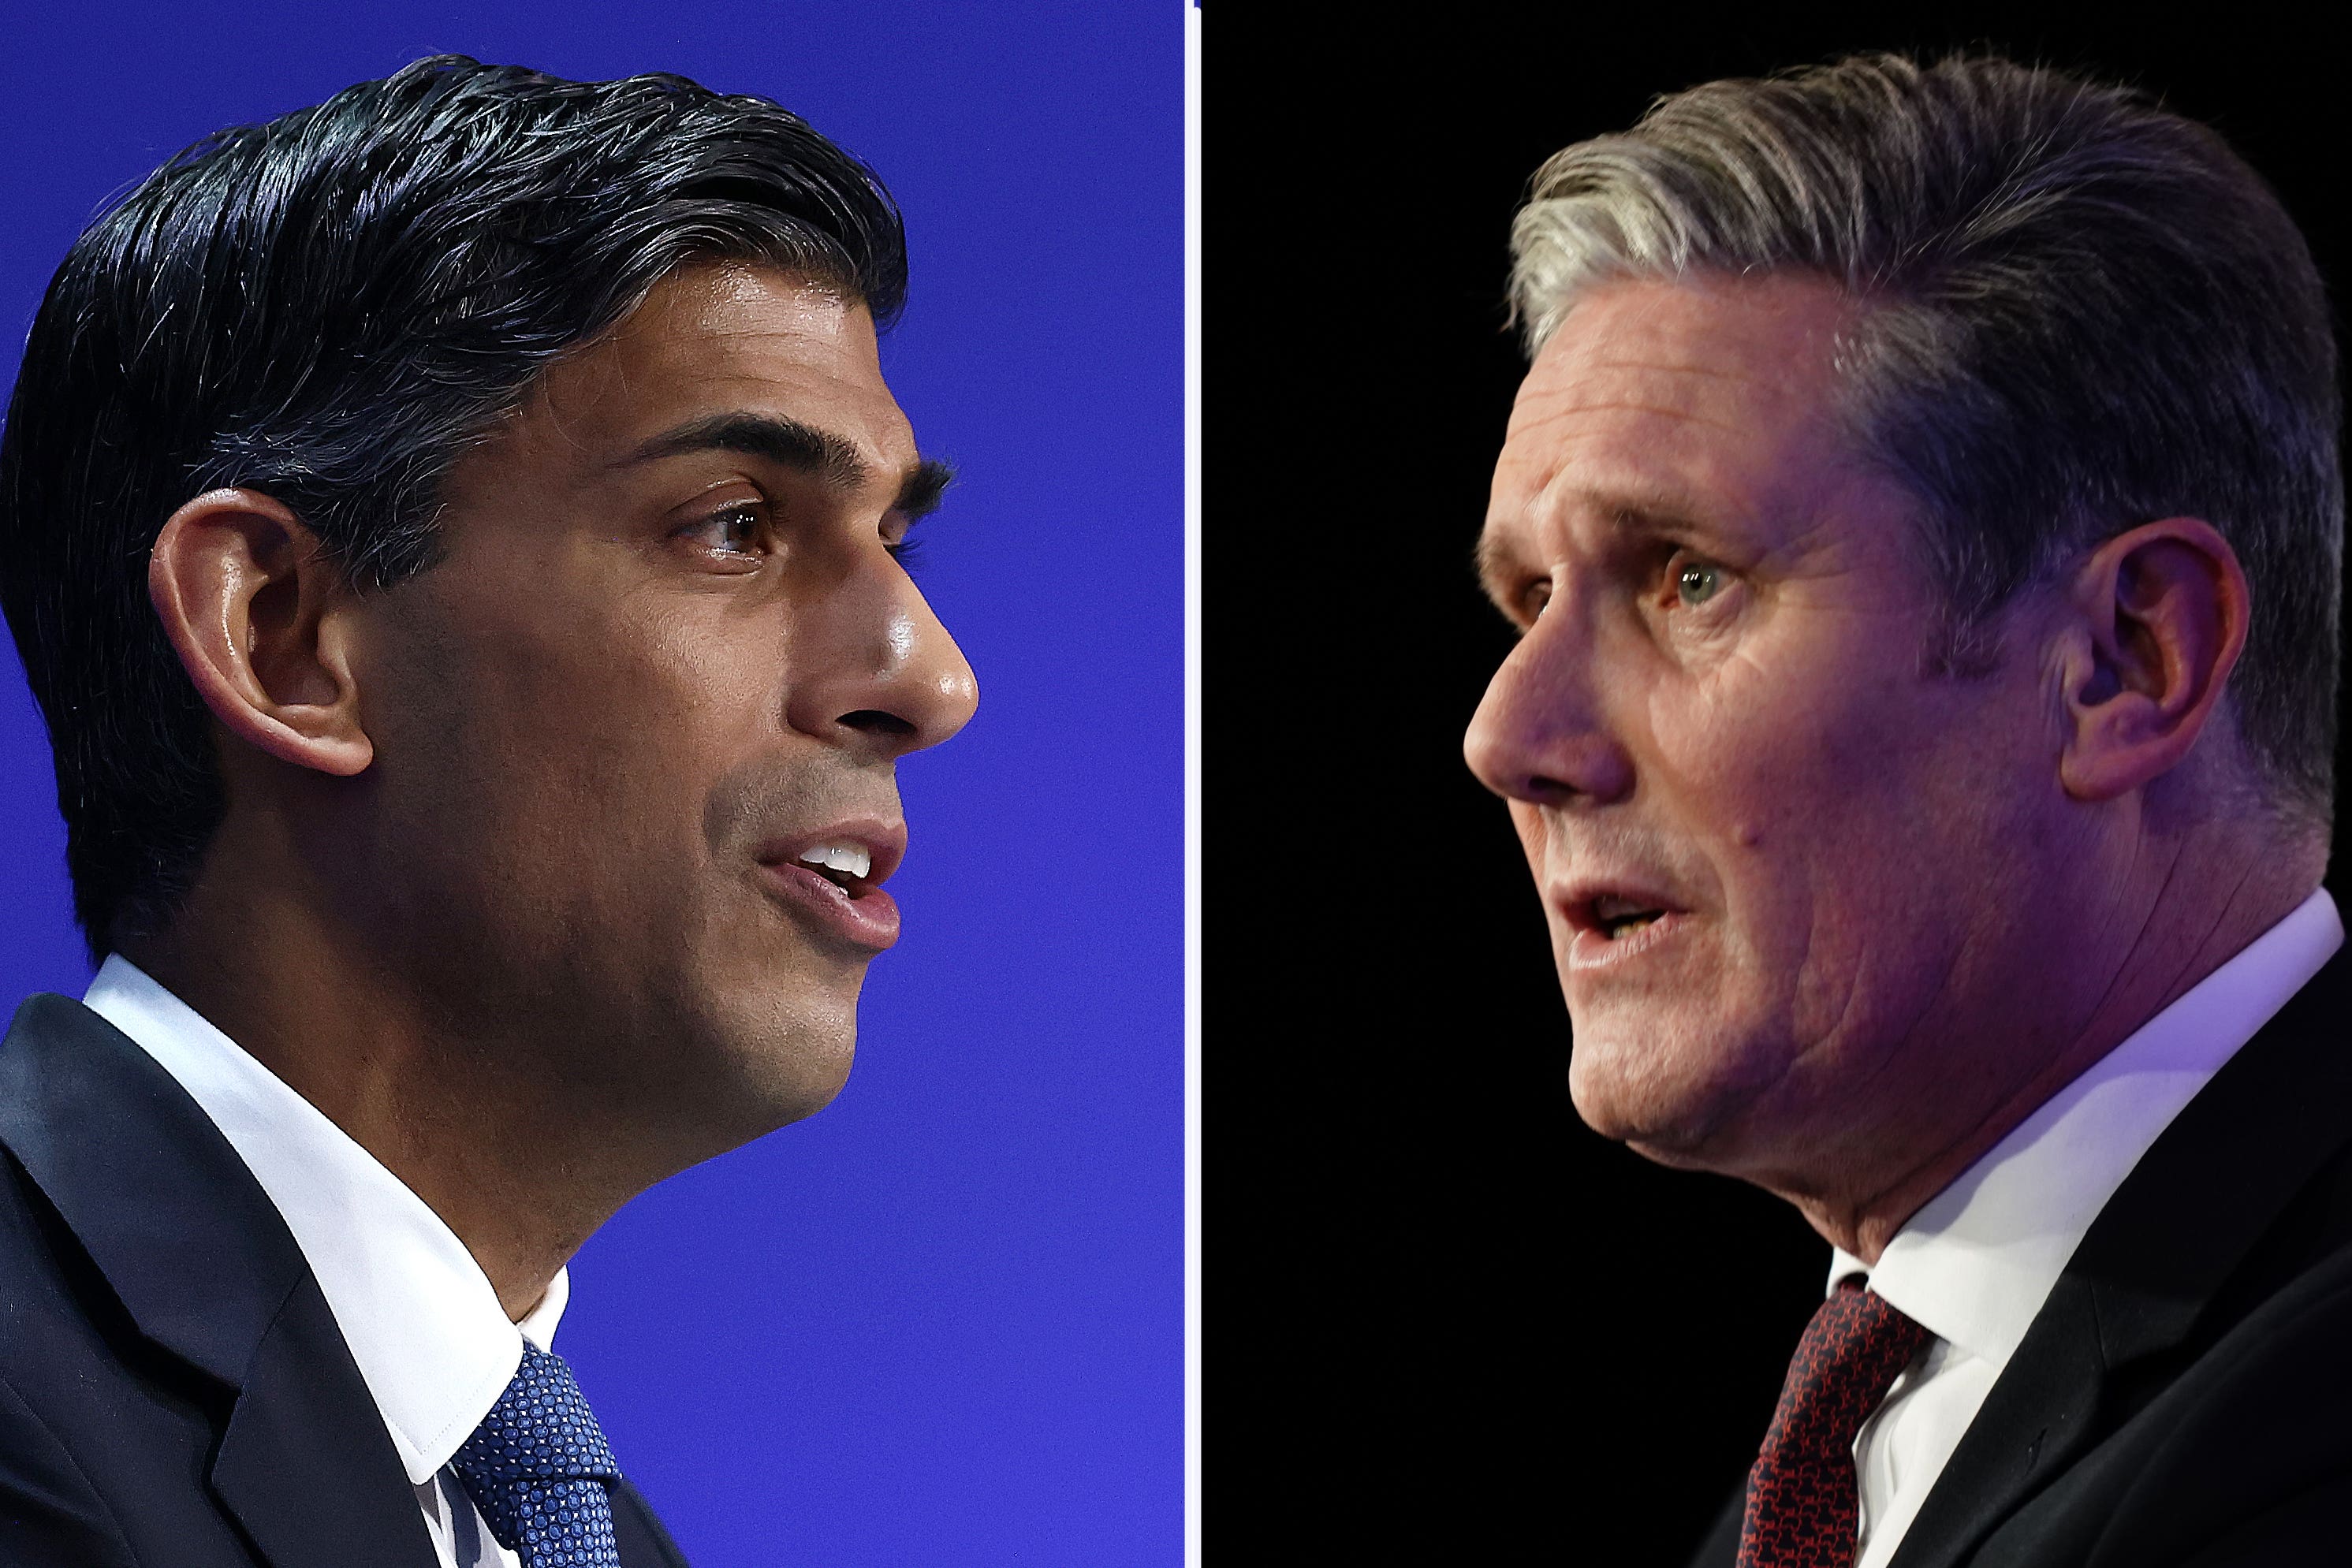 The final head-to-head debate between Sunak and Starmer will take place on 26 June